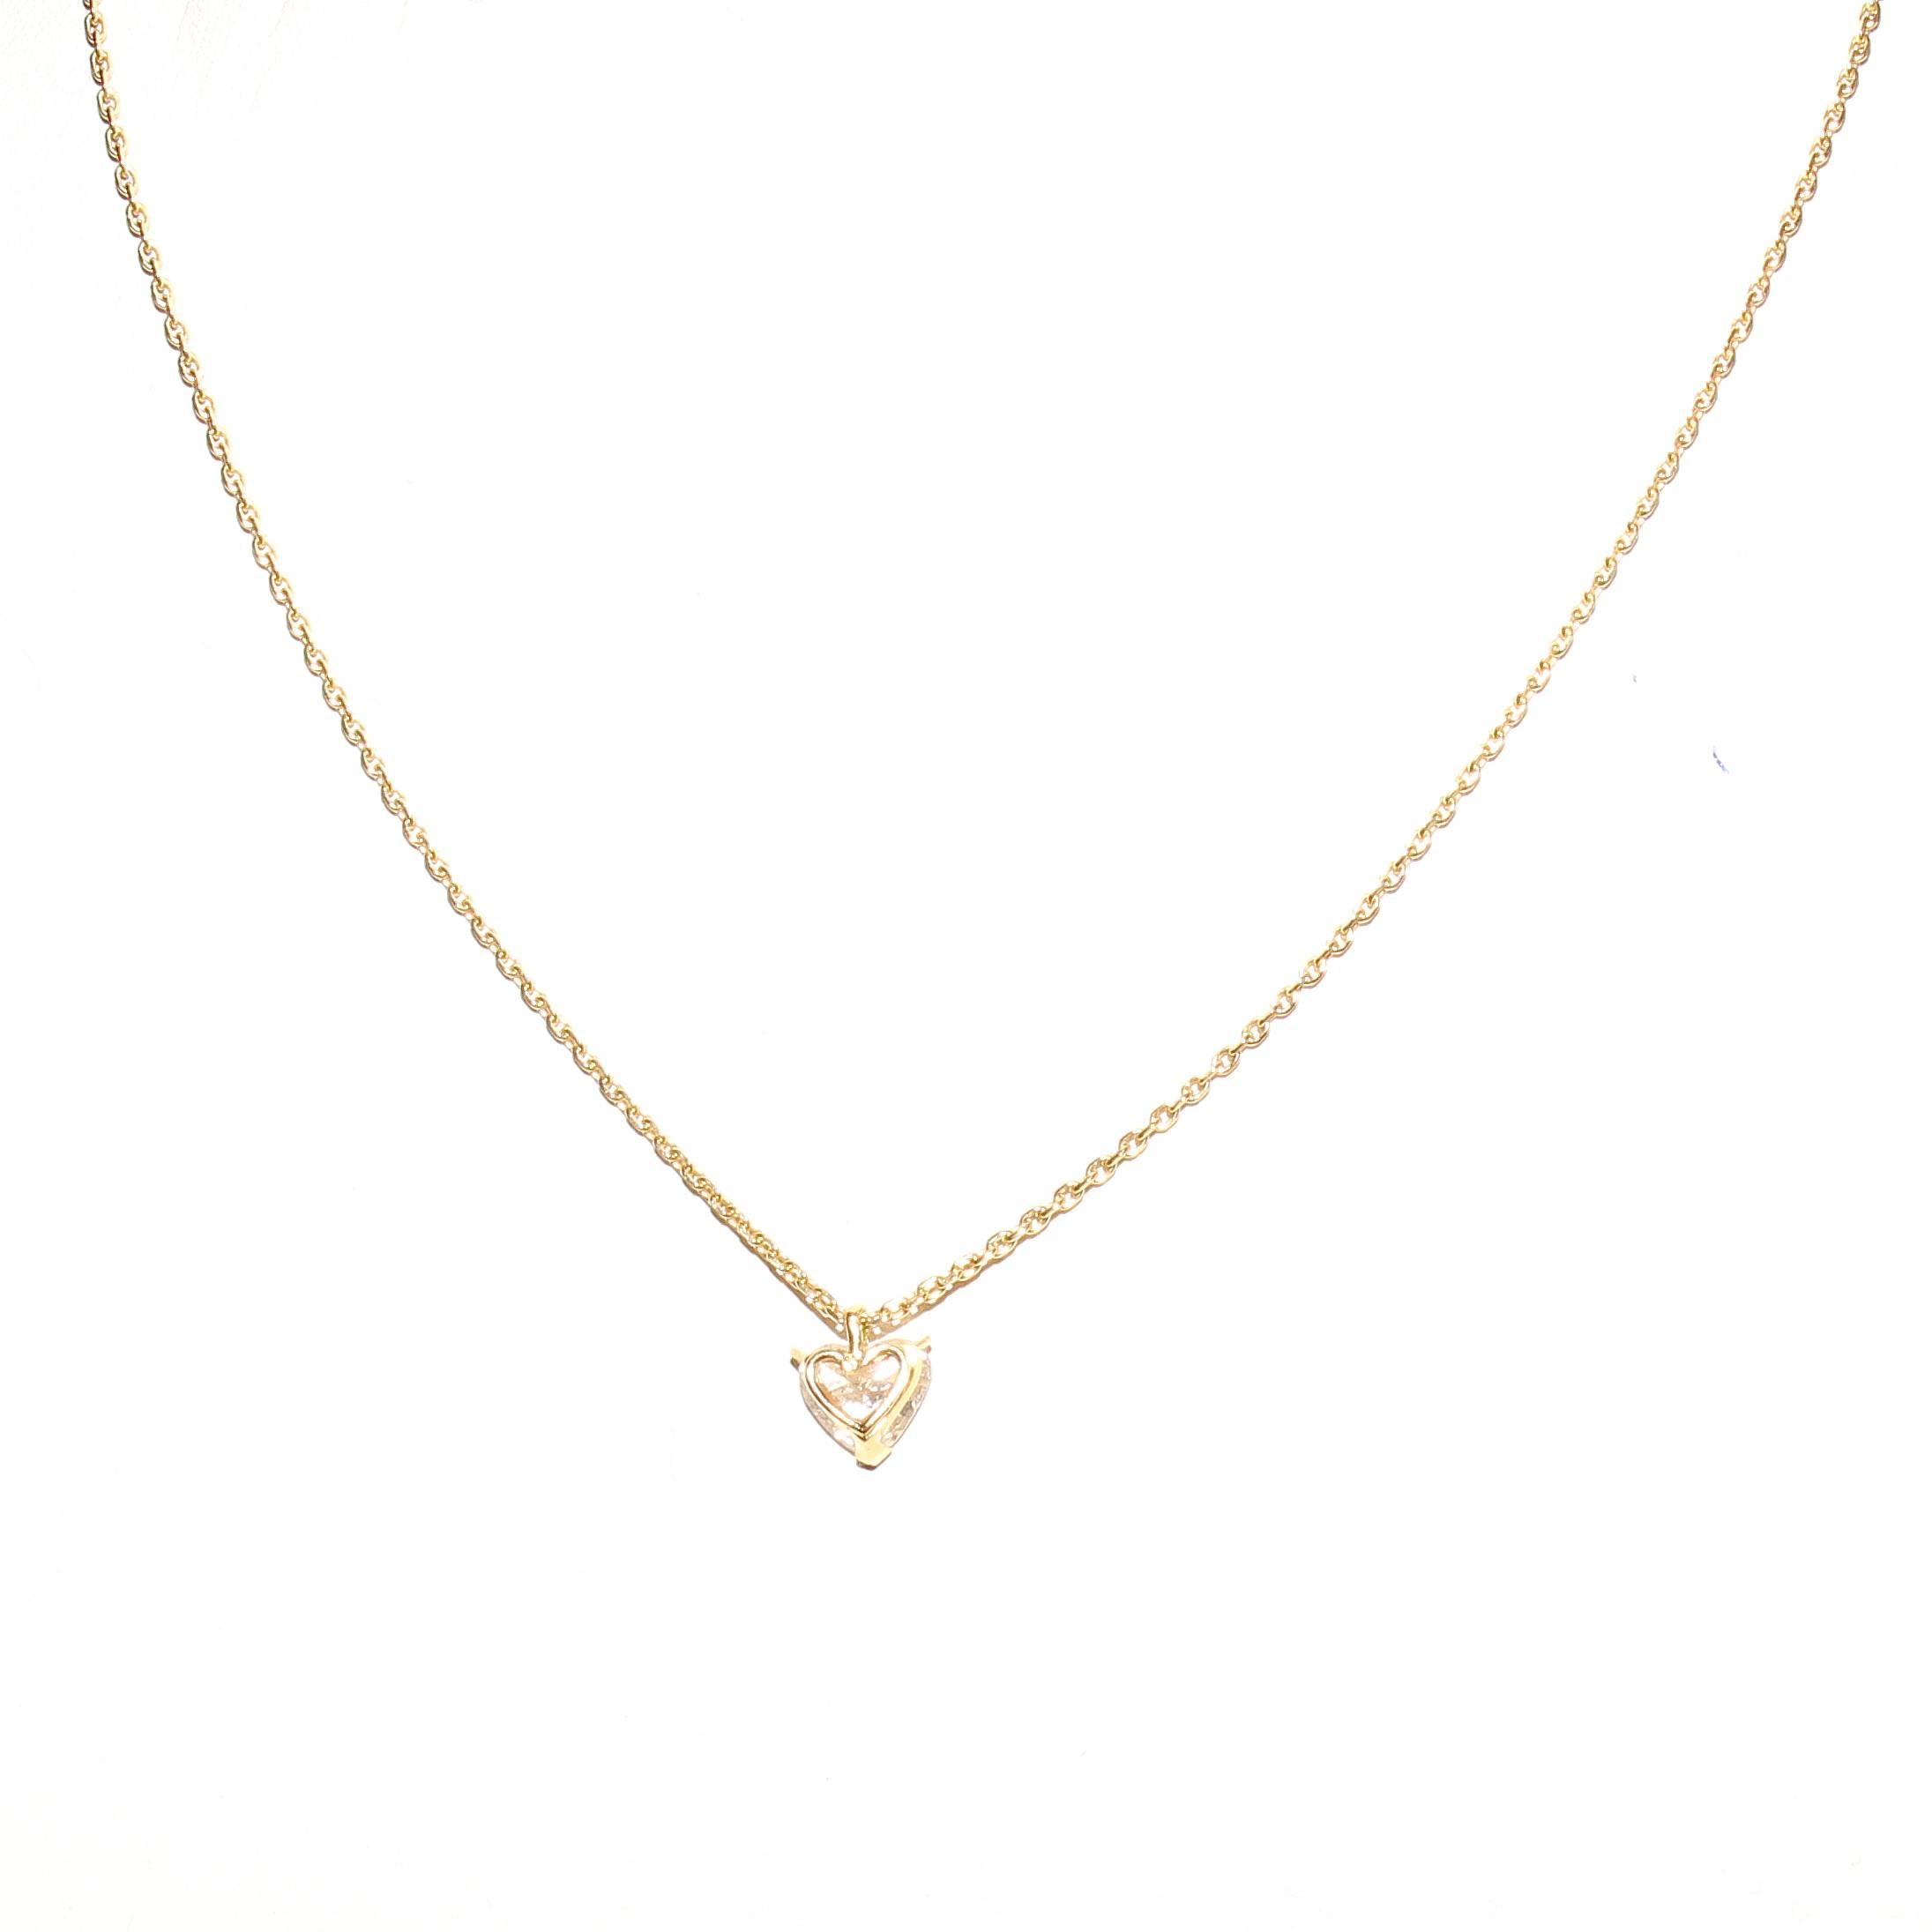 The ultimate sign of love and affection from Fred Paris. This necklace features a 1.11 carat heart-shaped diamond pendant that has been GIA certified as G color SI2 clarity. Crafted in 18k gold. Signed Fred.
